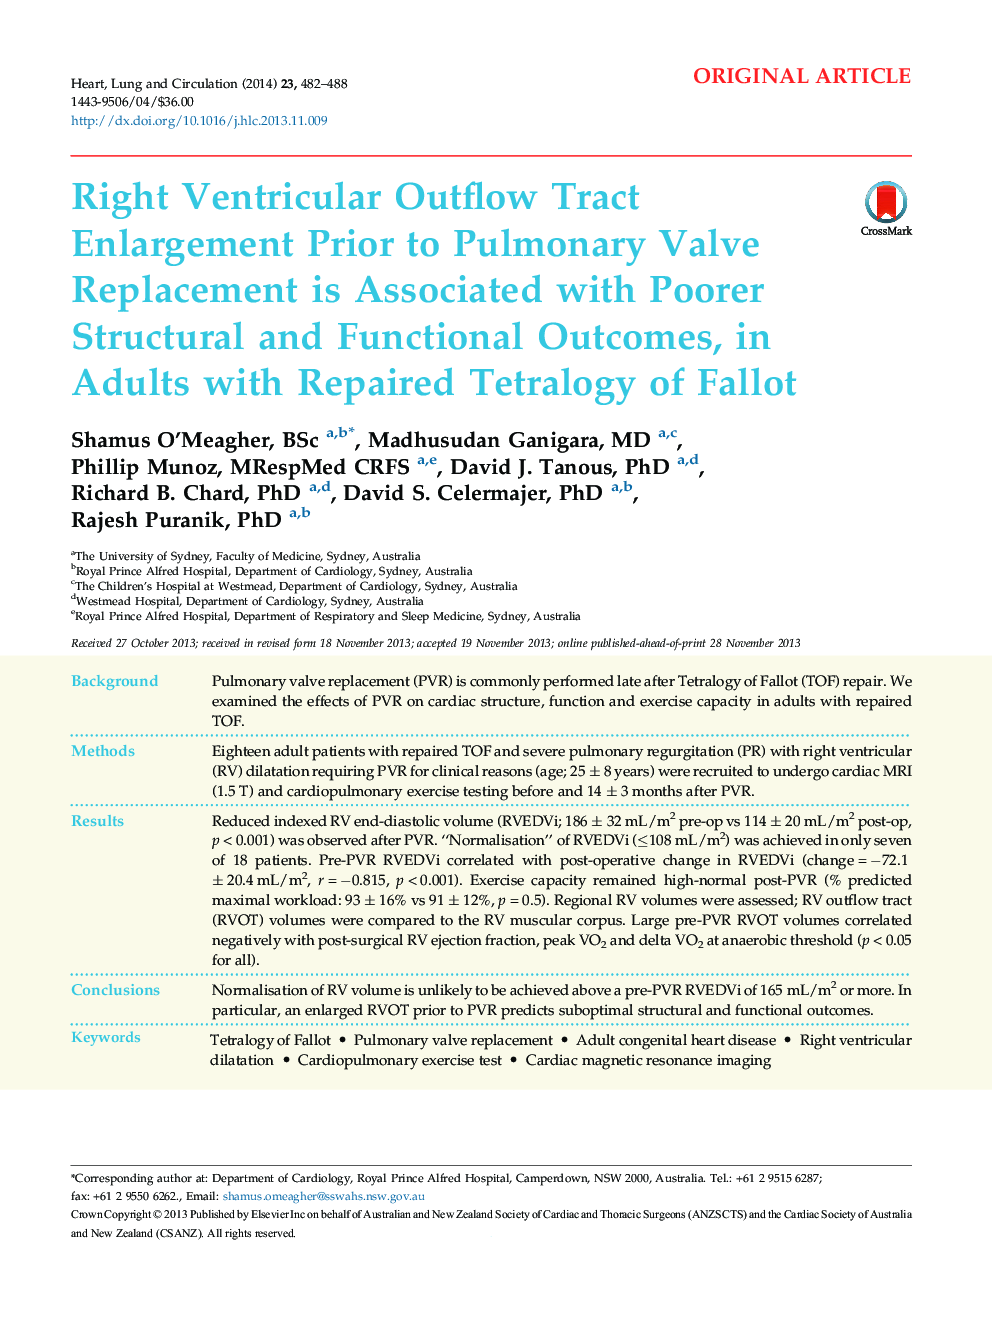 Right Ventricular Outflow Tract Enlargement Prior to Pulmonary Valve Replacement is Associated with Poorer Structural and Functional Outcomes, in Adults with Repaired Tetralogy of Fallot